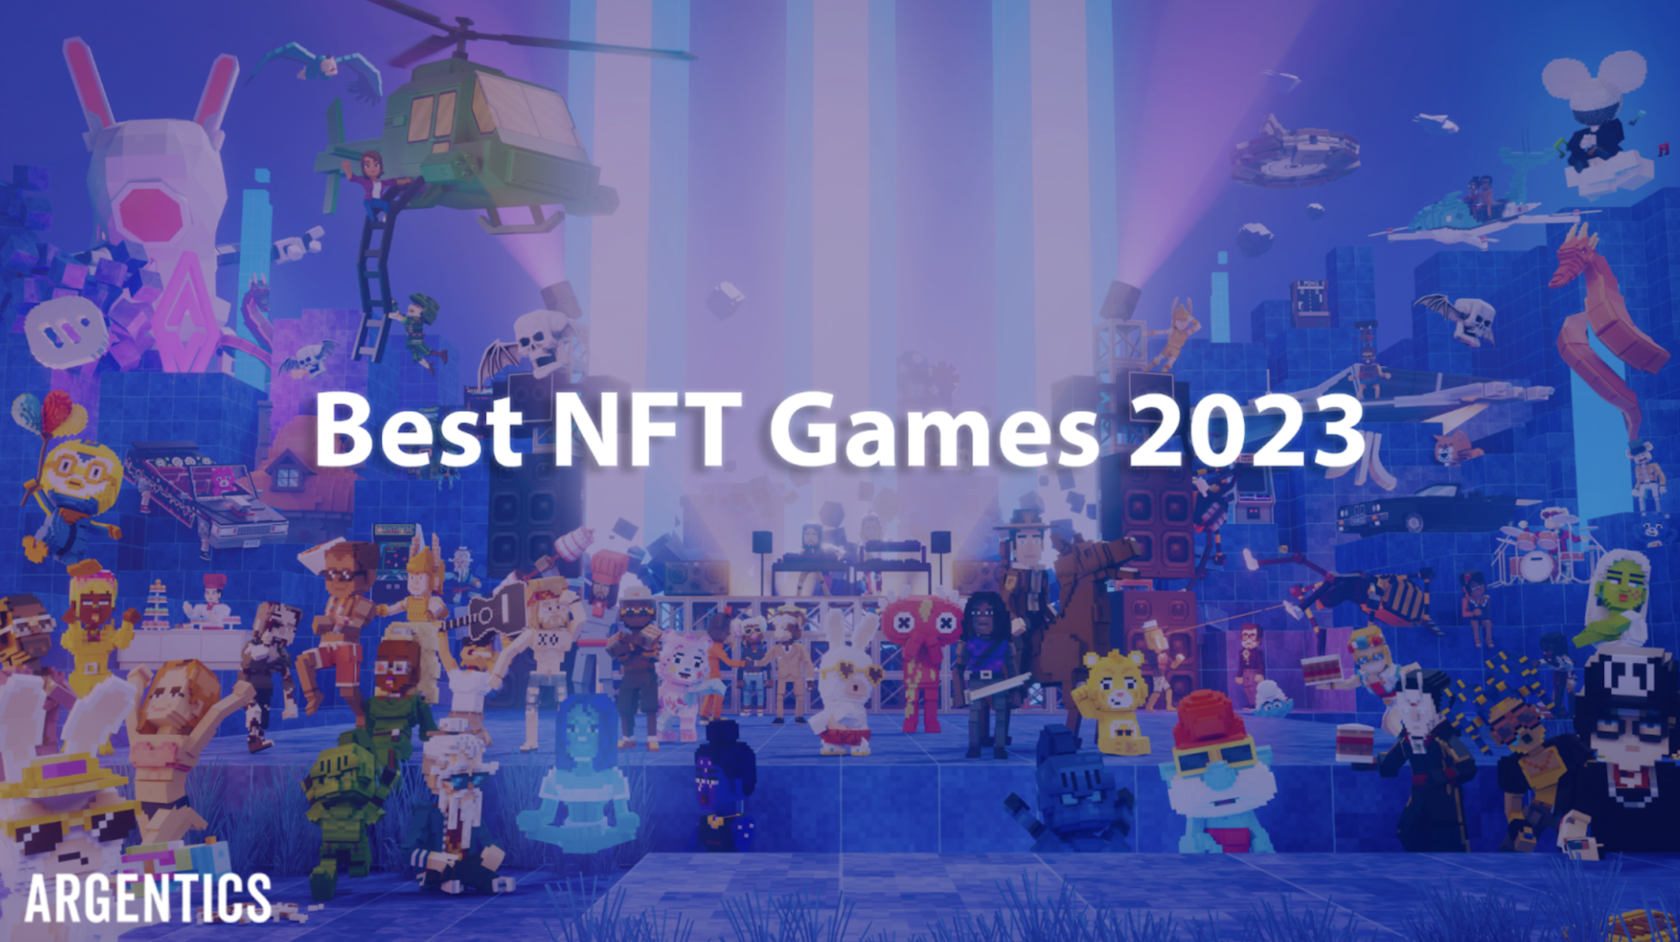 Twelve traditional companies that have adopted NFTs